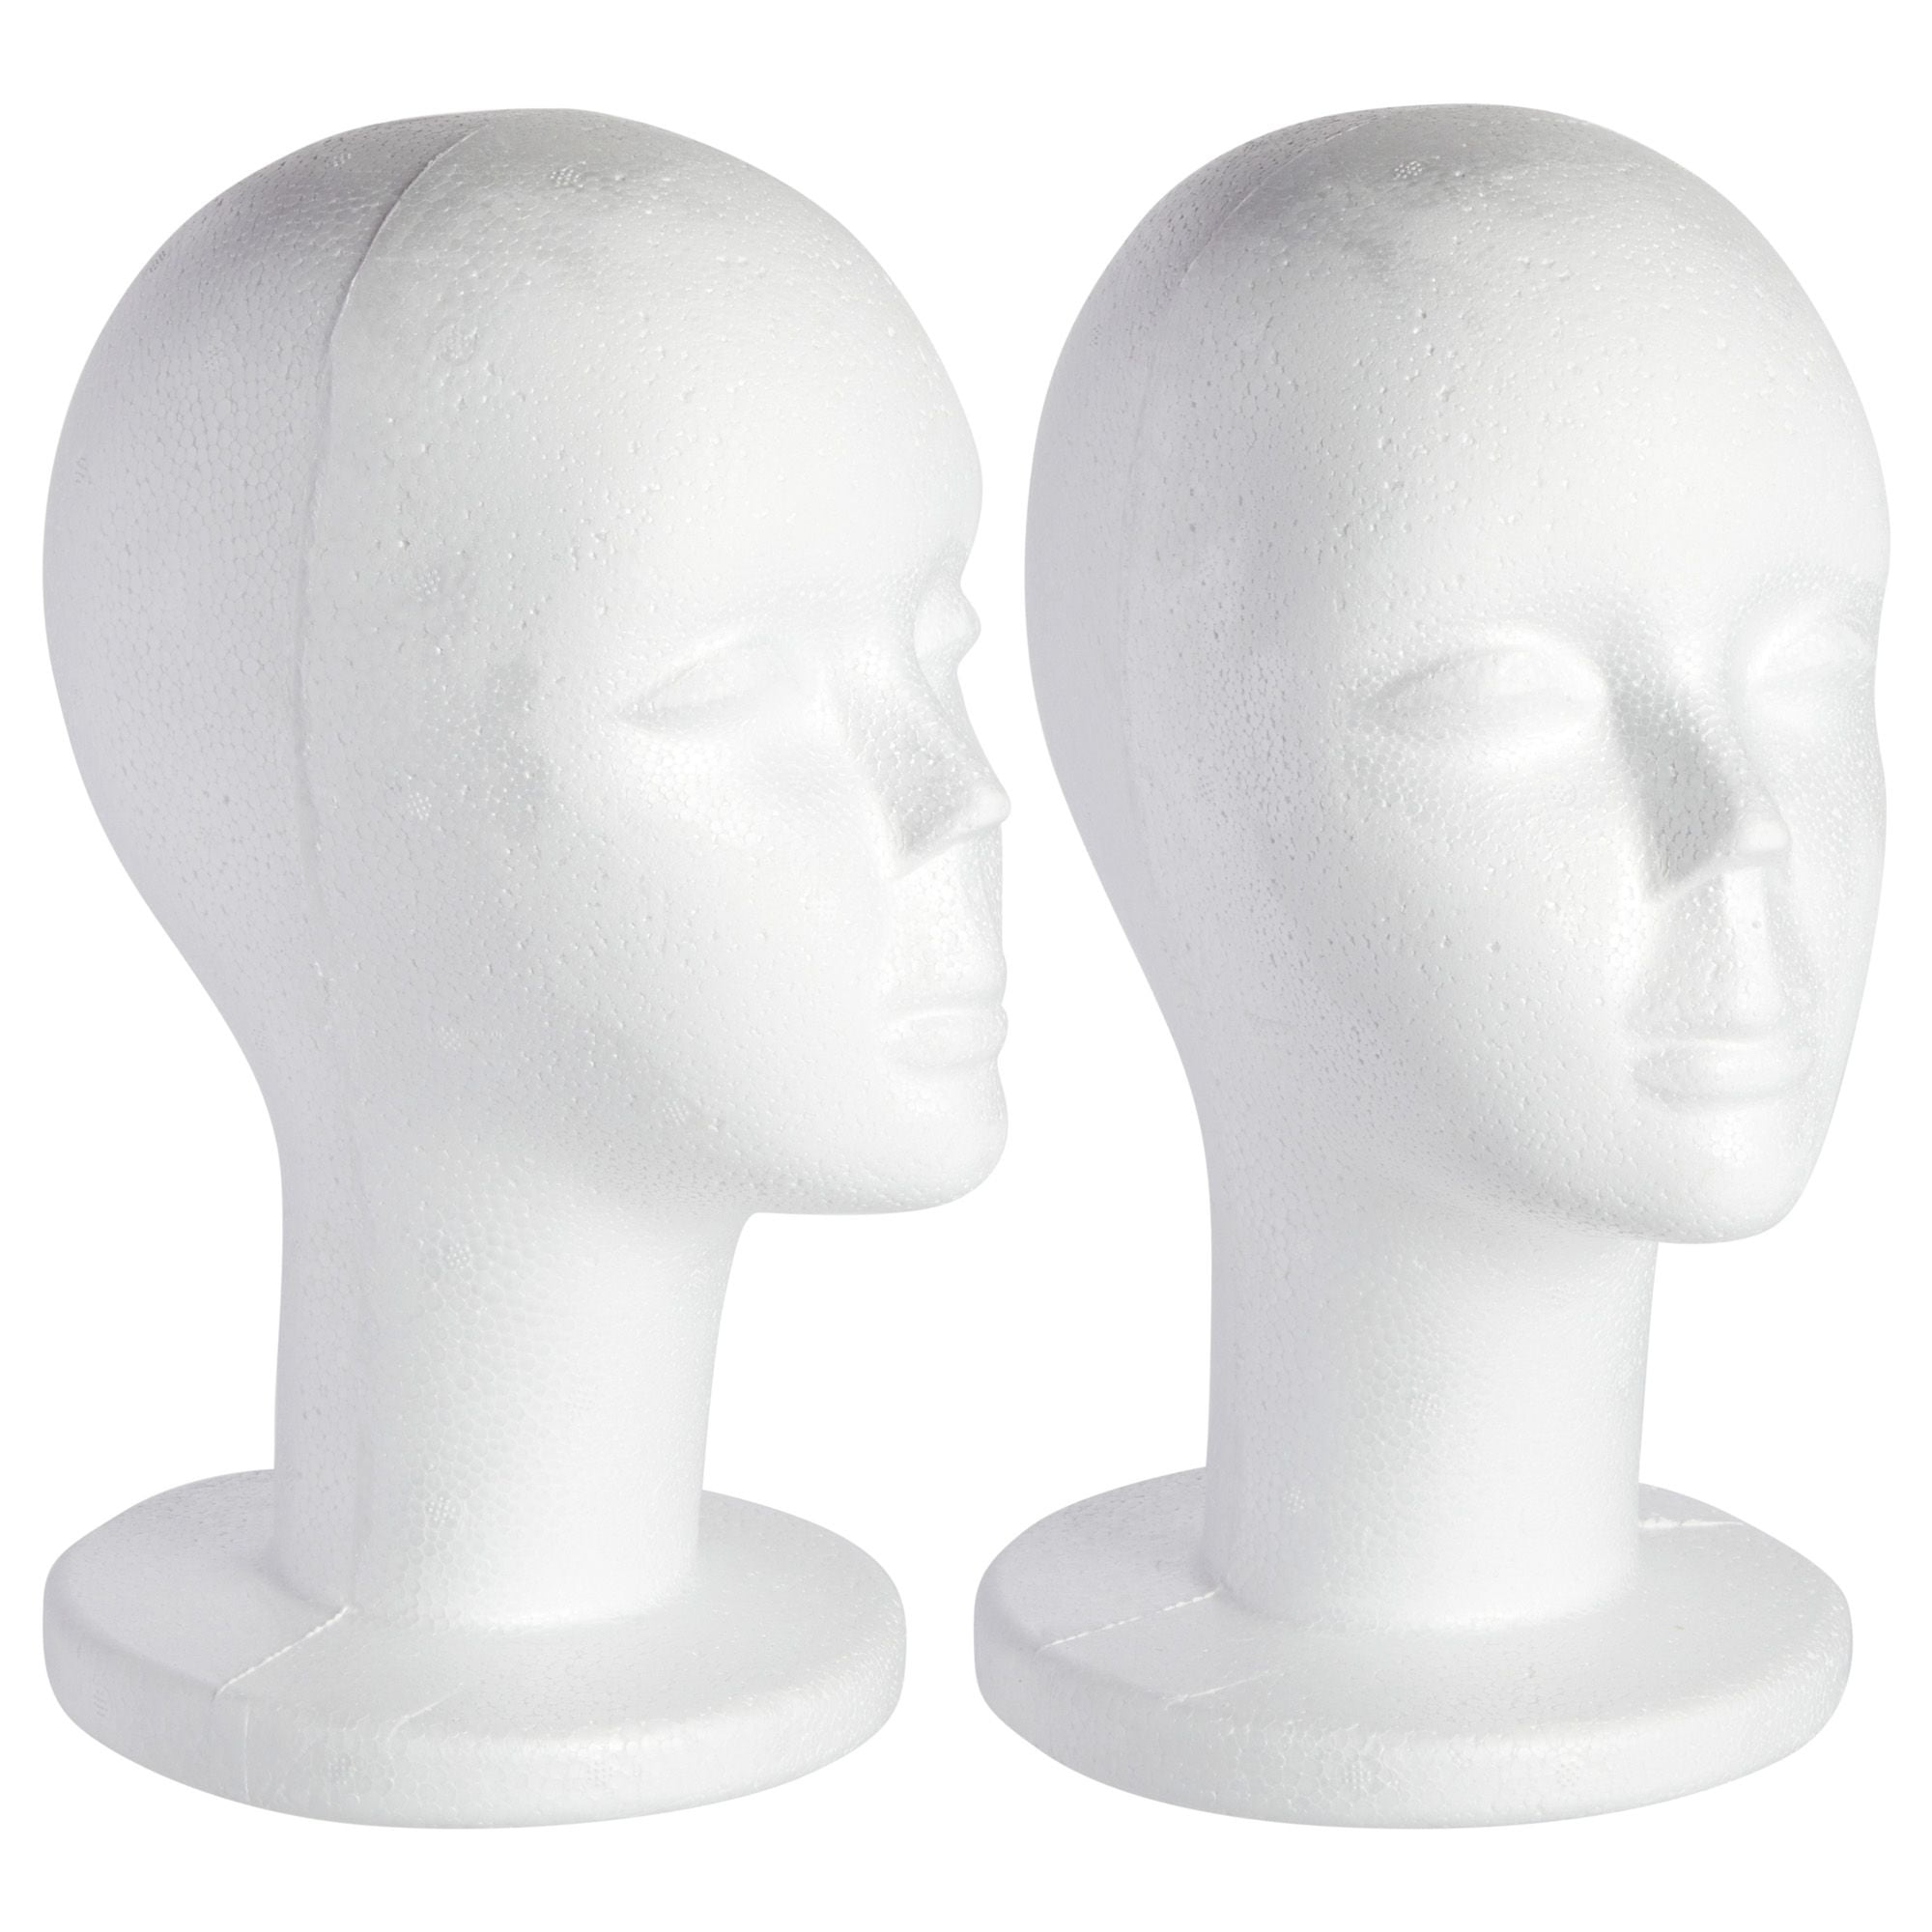 Male Mannequin Head, Foam Heads for Wigs (11 in, 2 Pack) –  BrightCreationsOfficial